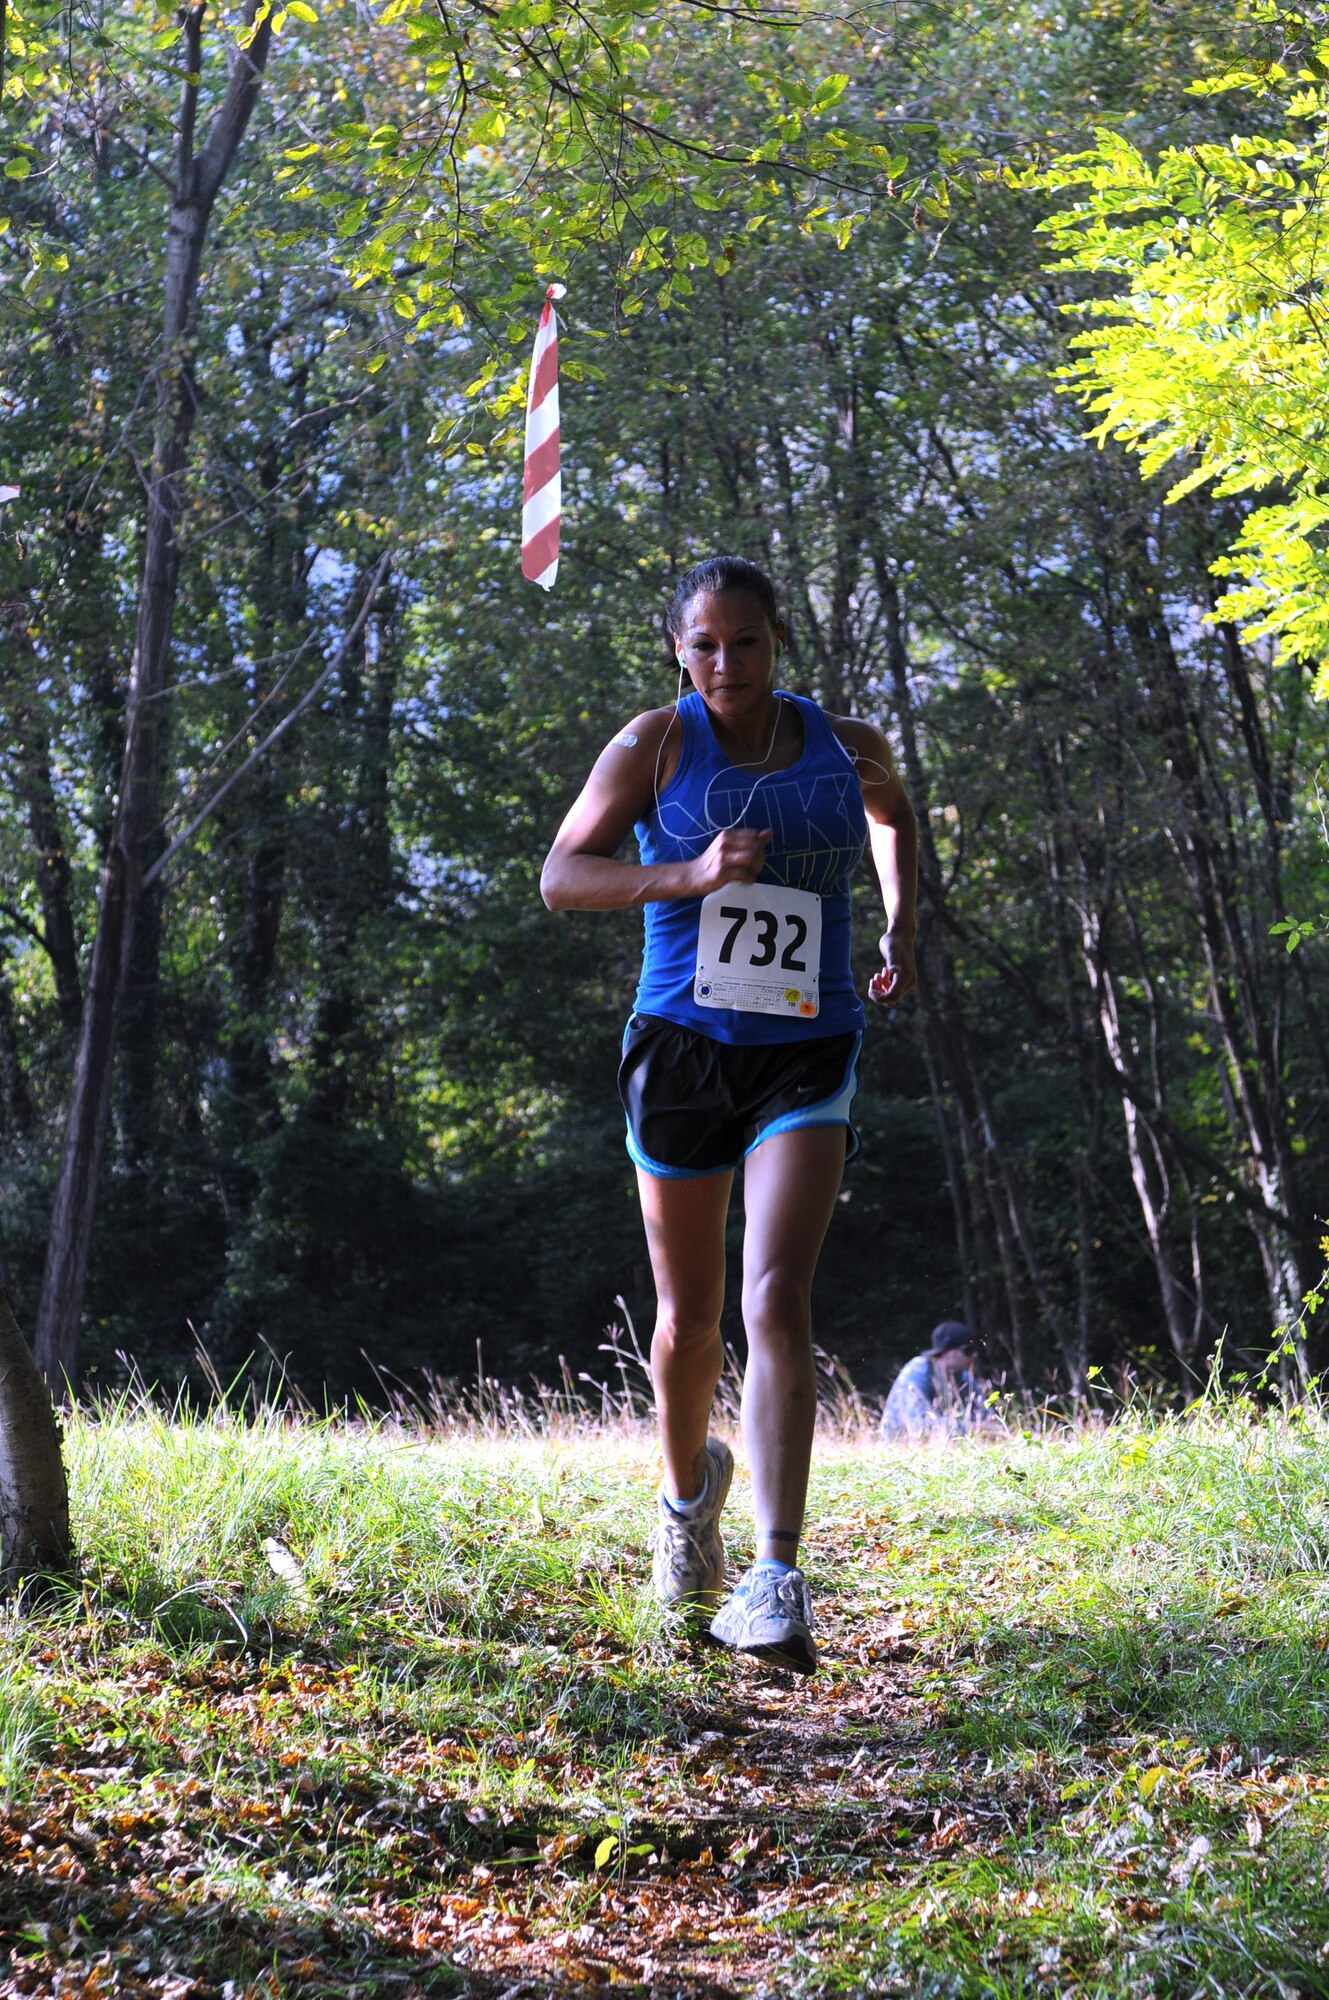 Lynette Cullins, 31st Operations Support Squadron, runs the women's 5 km course of the 2010 U.S. Air Forces in Europe Cross-Country Central Region Championships Oct. 15 at Madonna Del Monte, Aviano, Italy. (U.S. Air Force photo/Staff Sgt. Julius Delos Reyes)